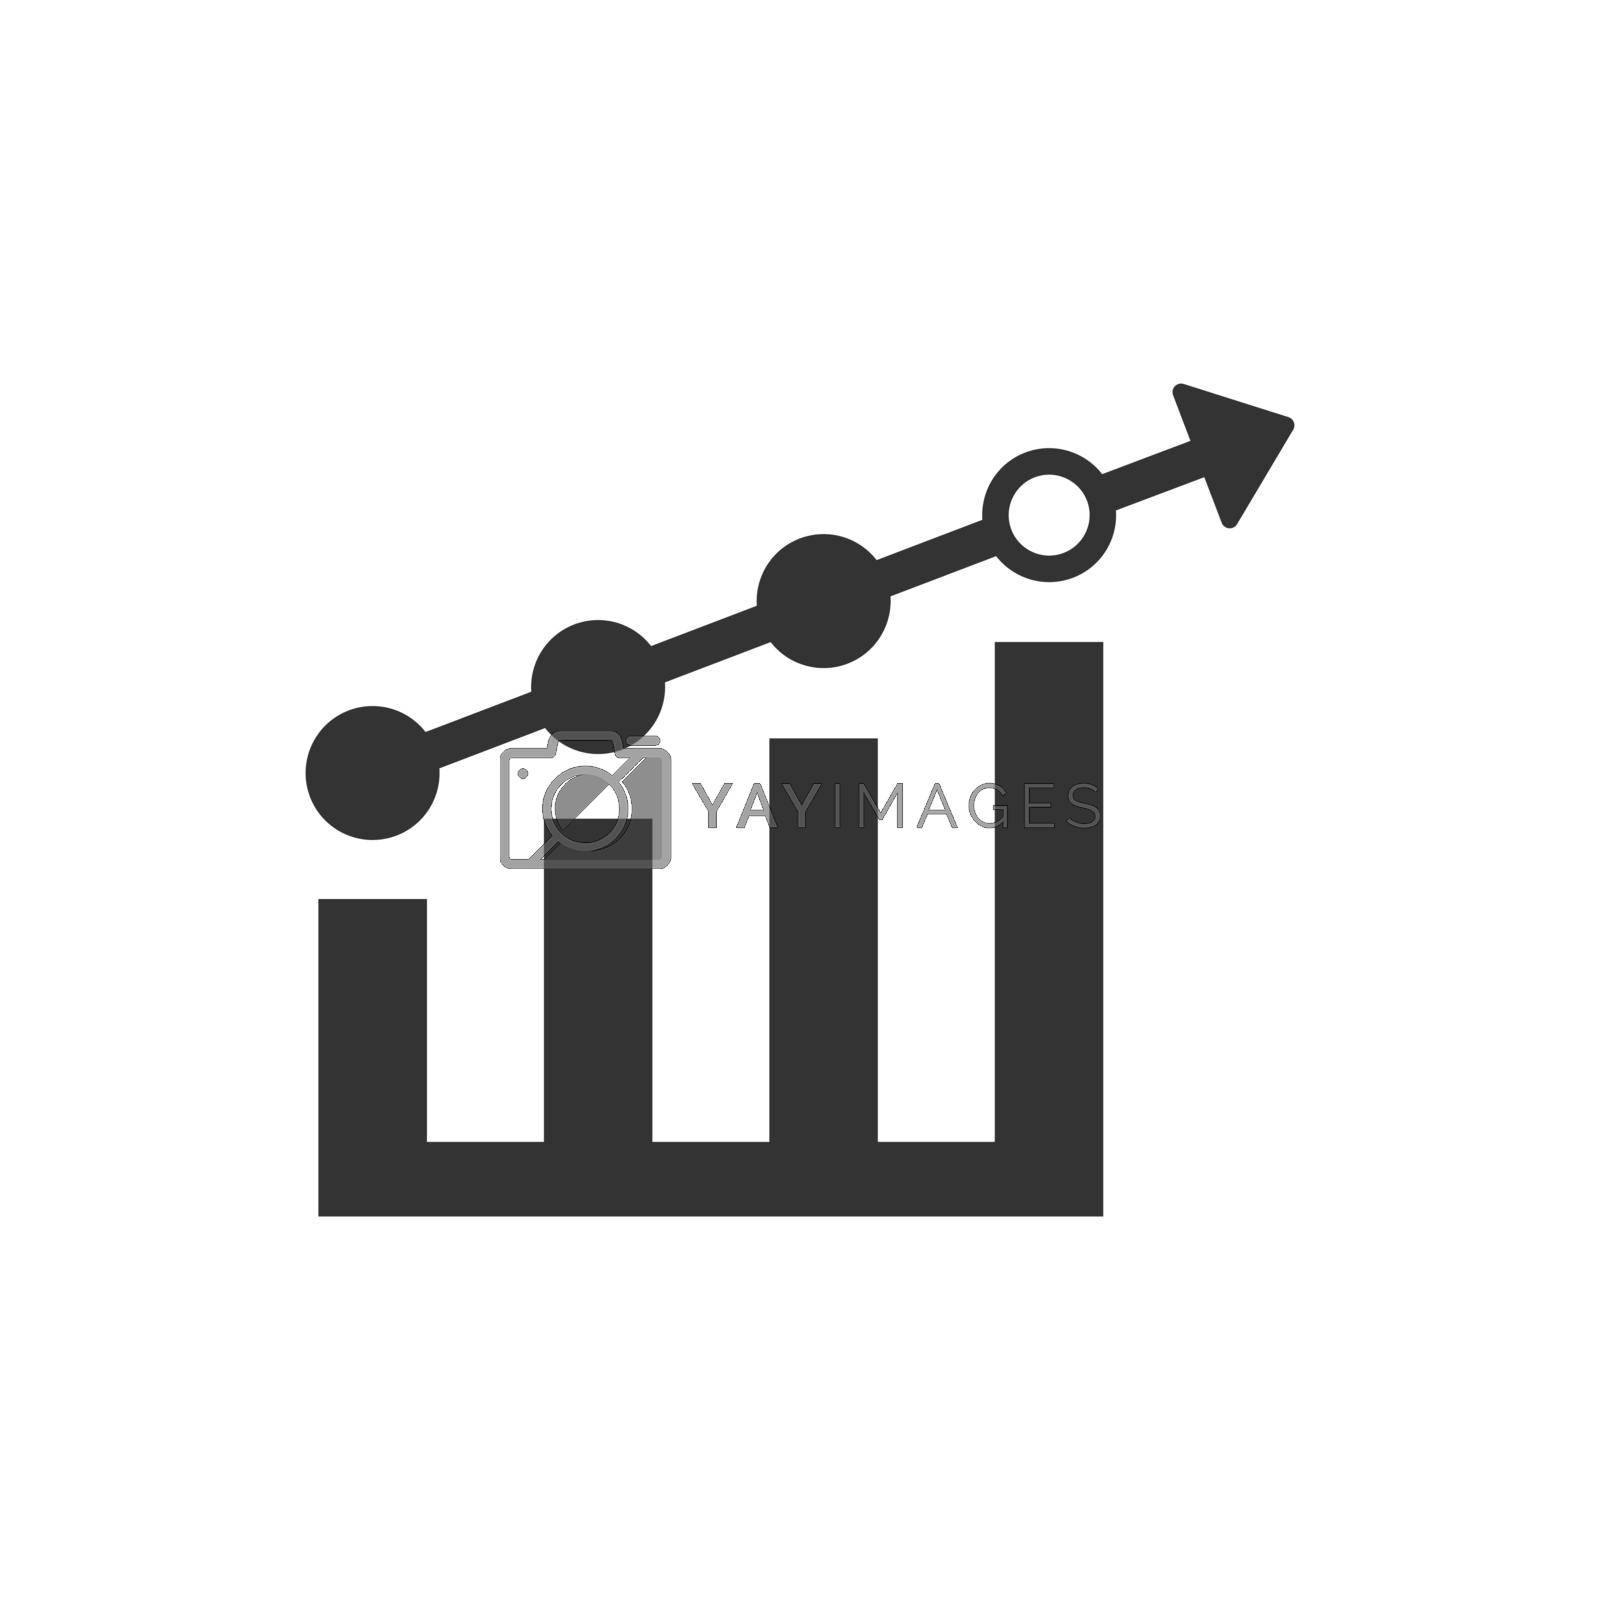 Royalty free image of Growth report icon  by delwar018